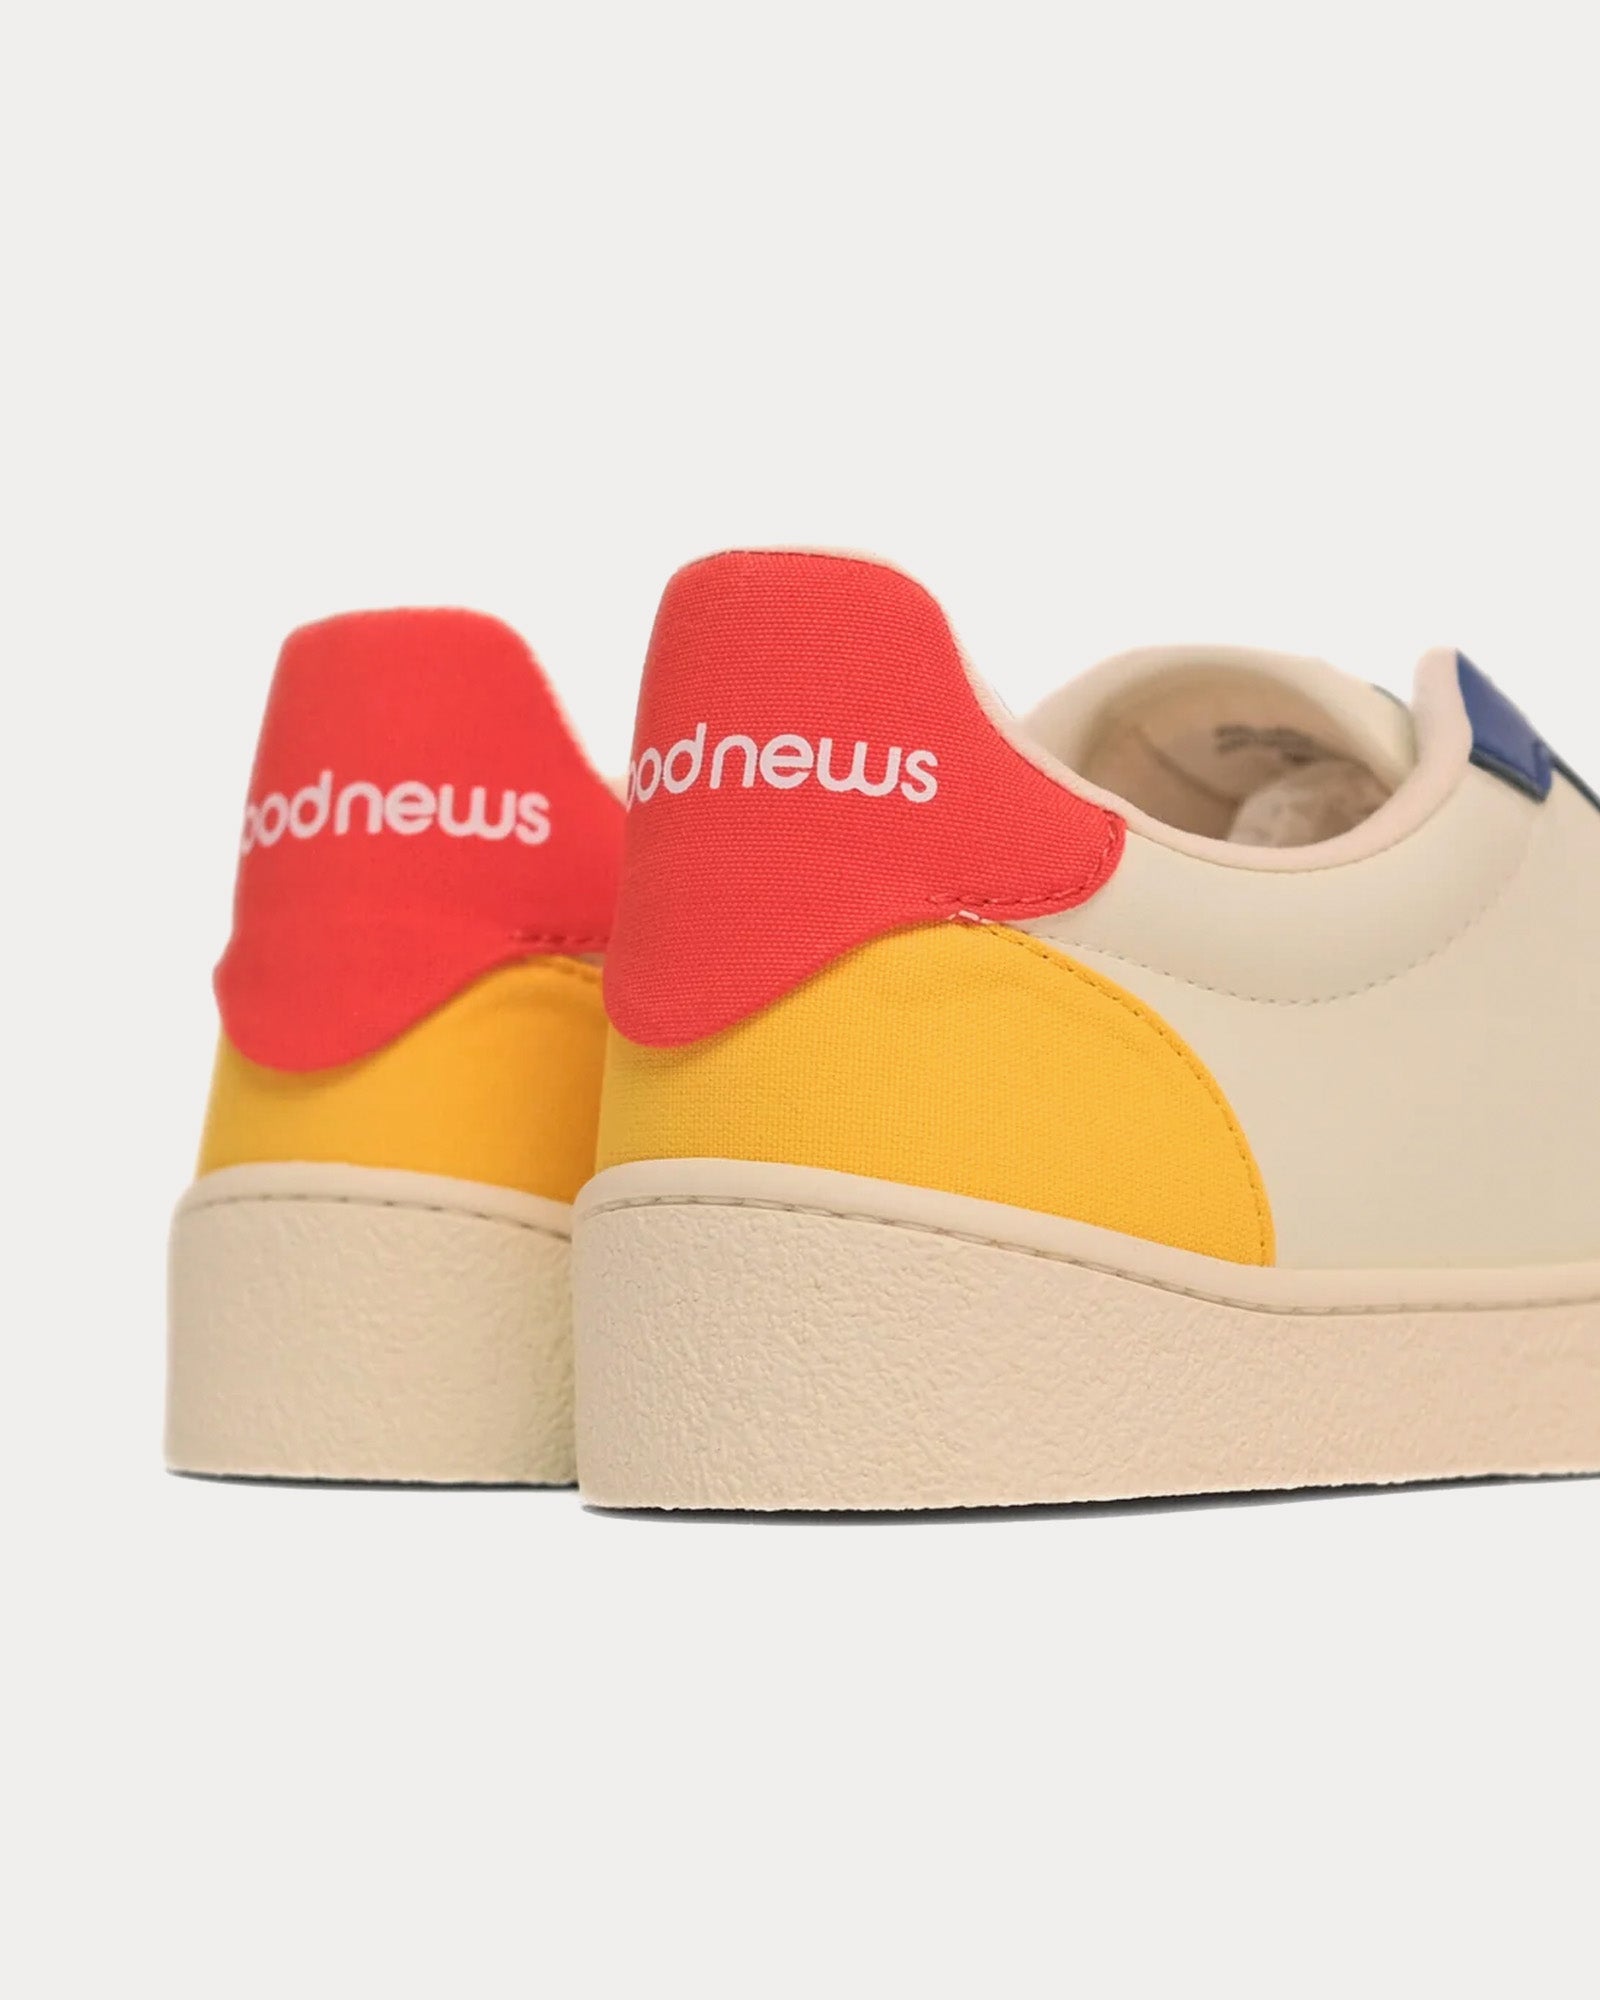 Good News - Venus White / Blue / Red / Yellow Low Top Sneakers